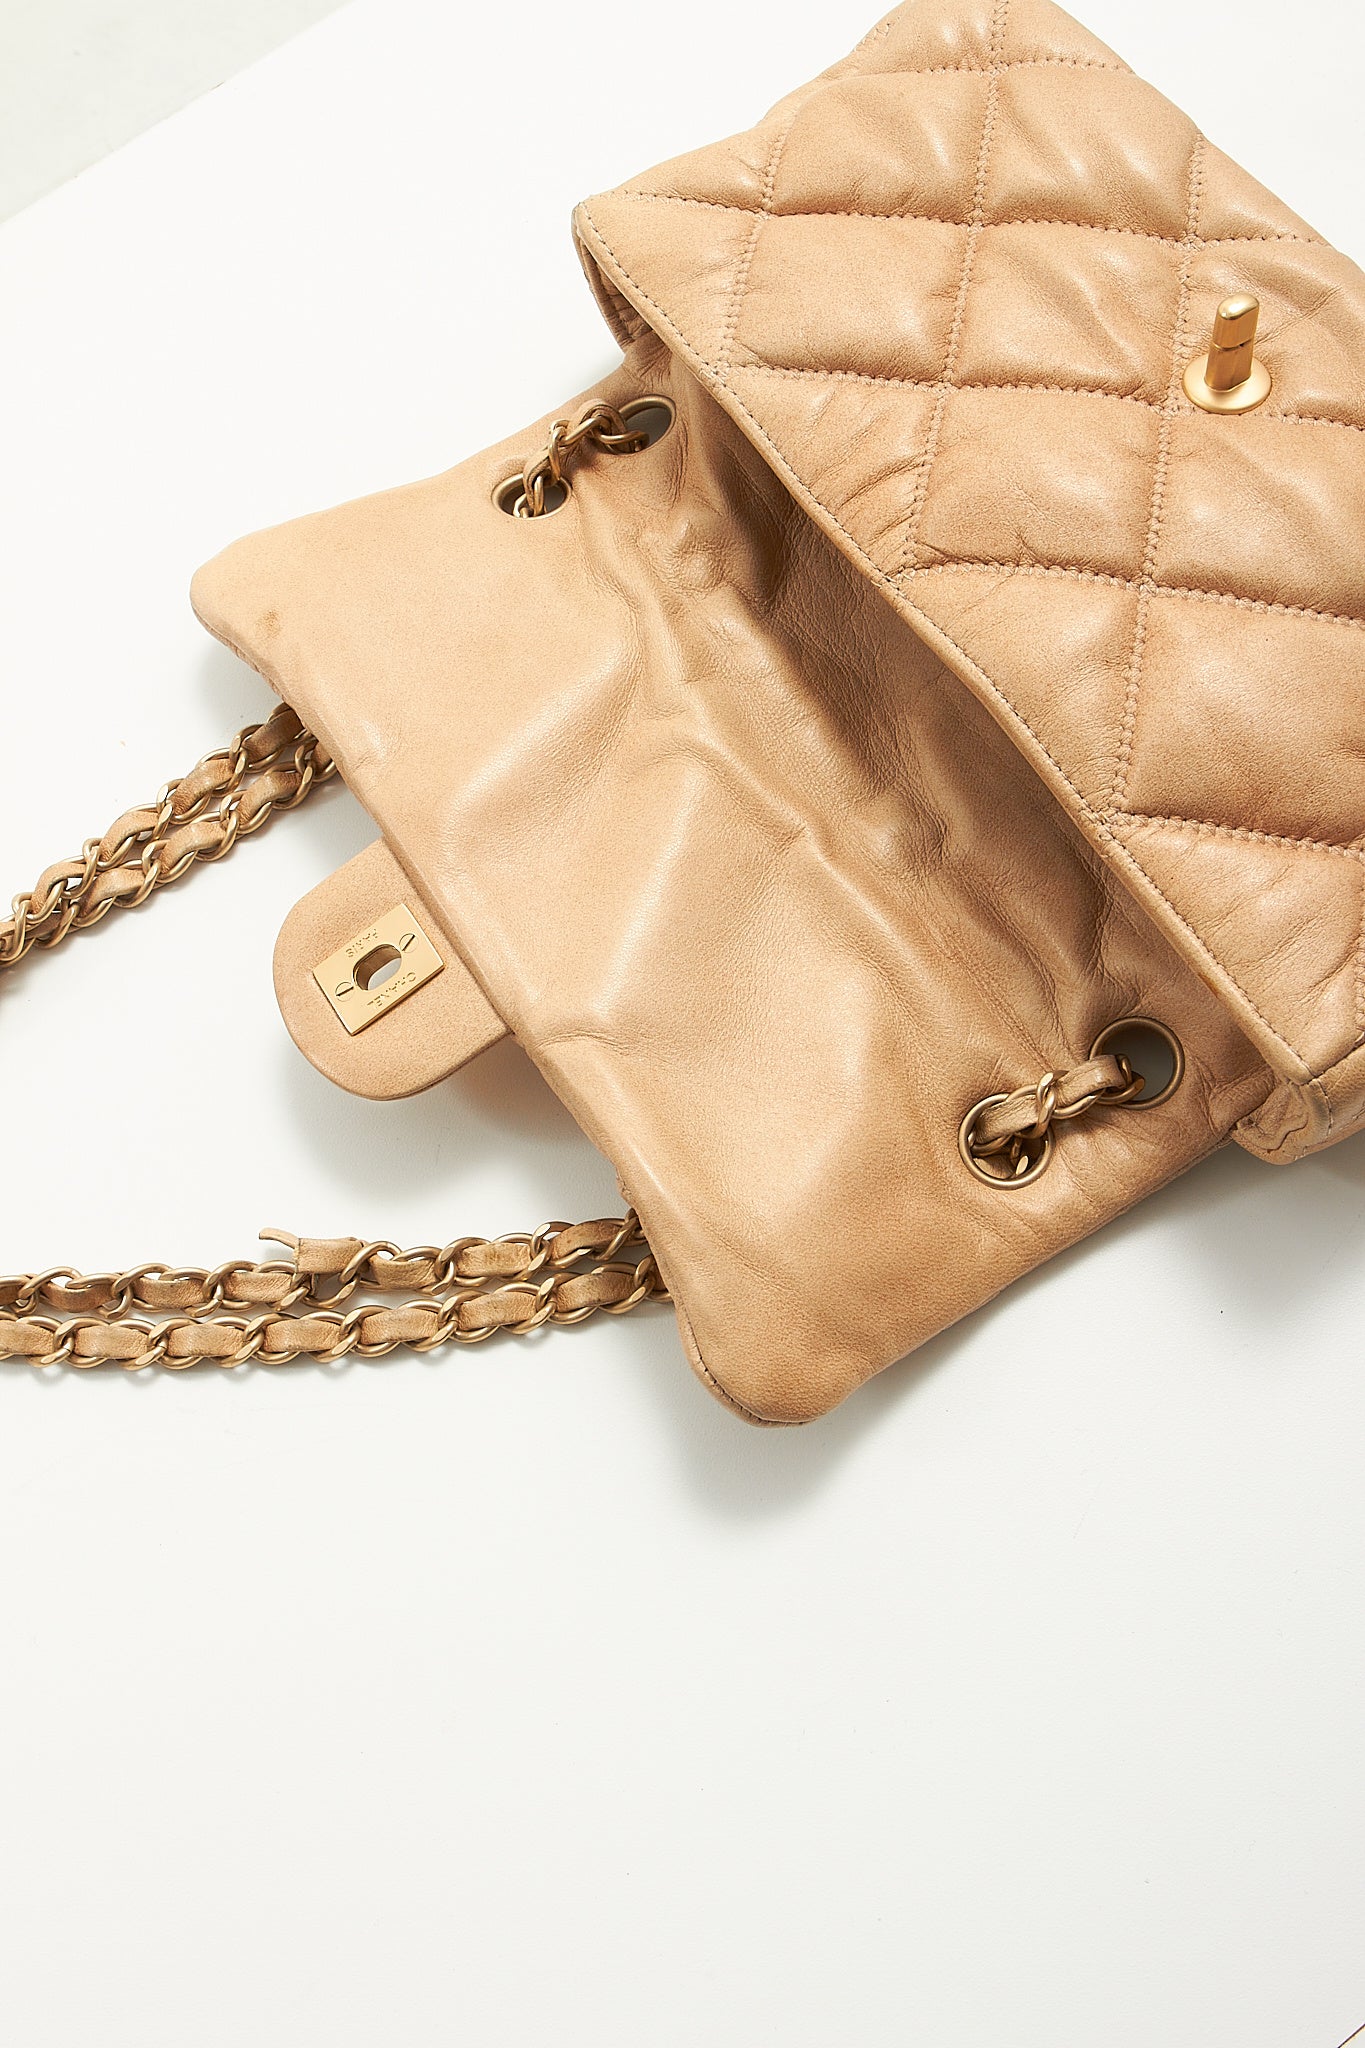 Chanel Beige Puffy Leather Shoulder Chain Flap Bag